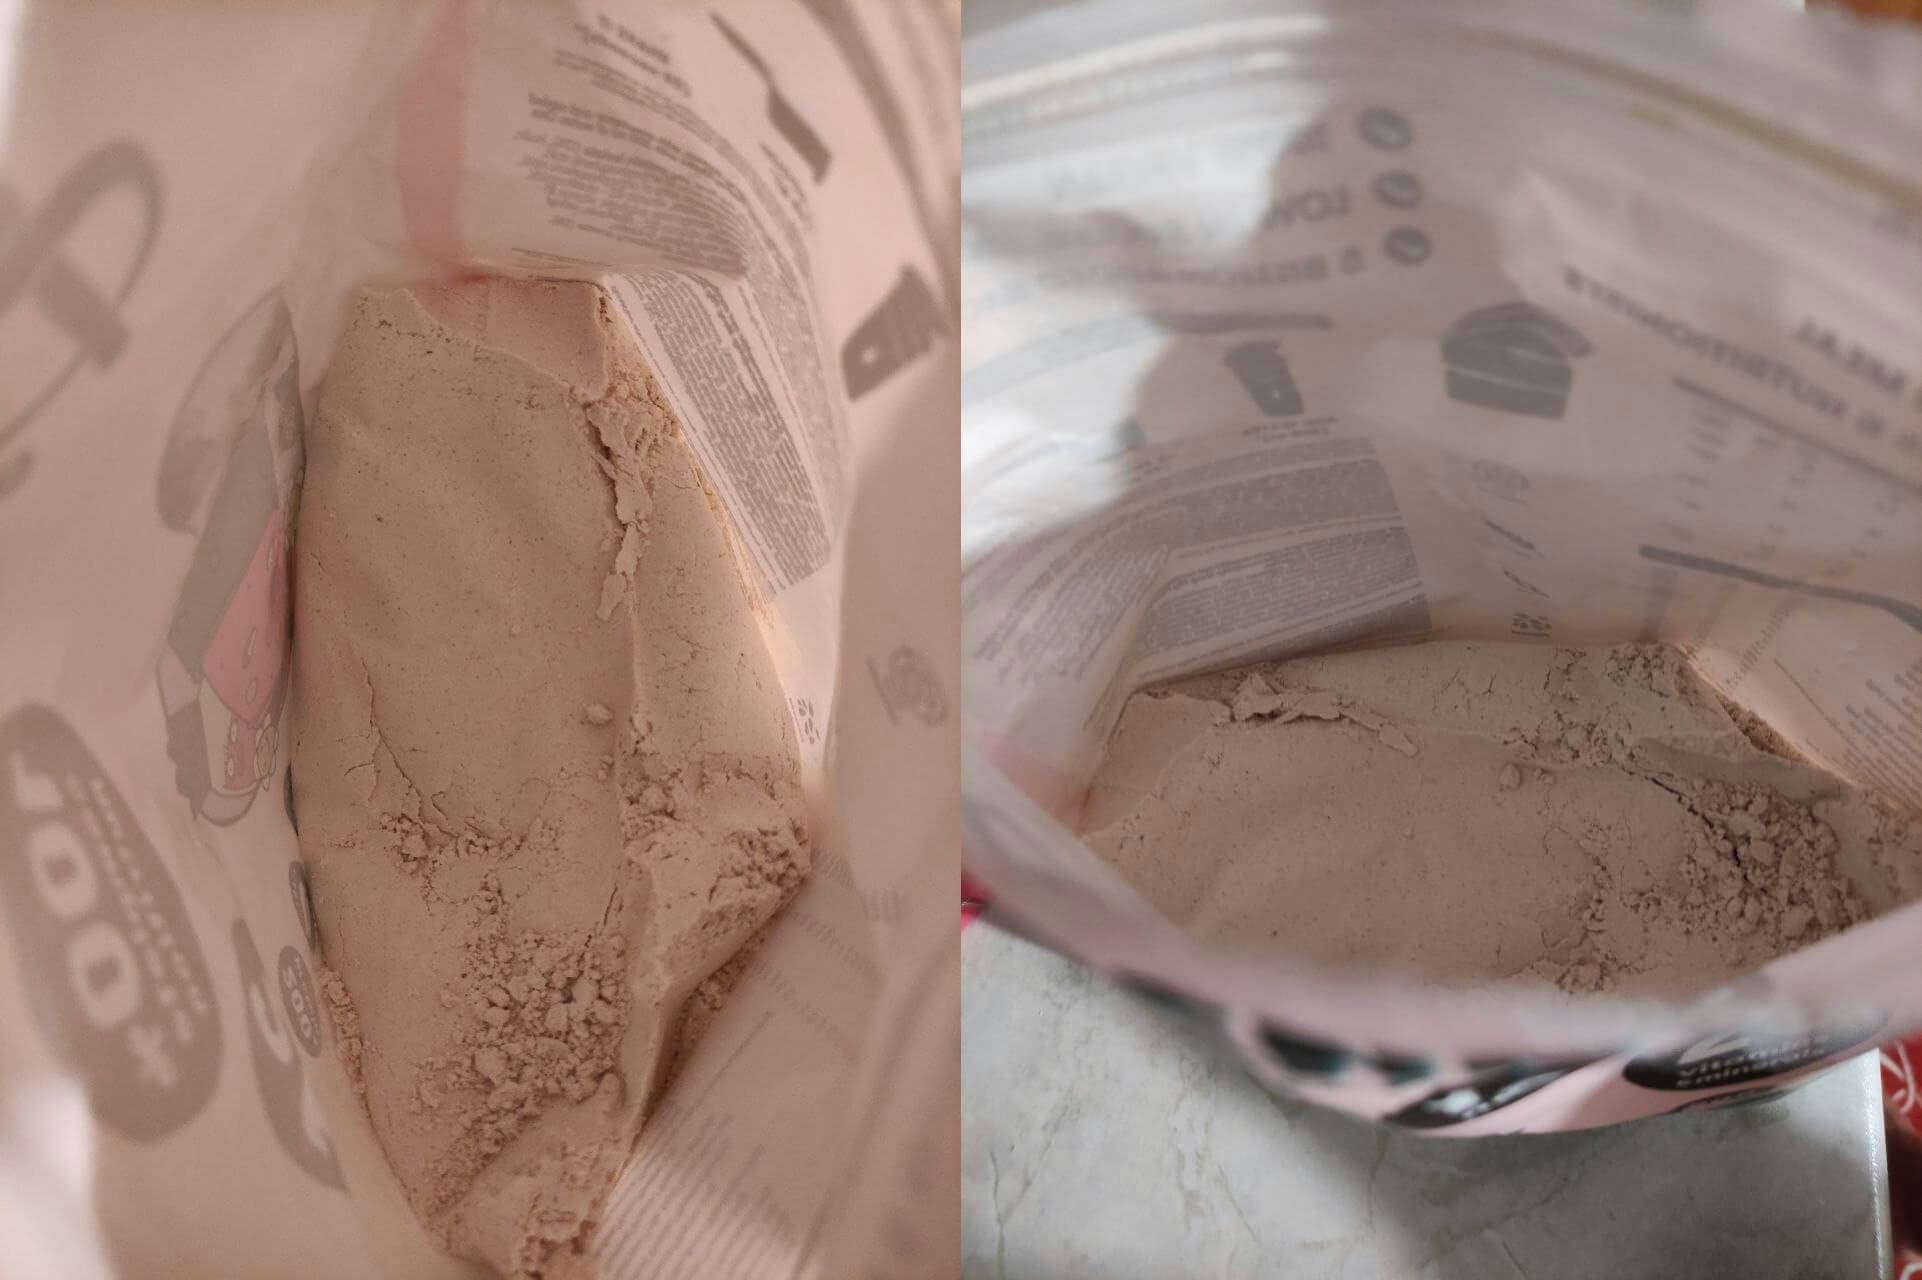 the powder inside the boxes of Plenny